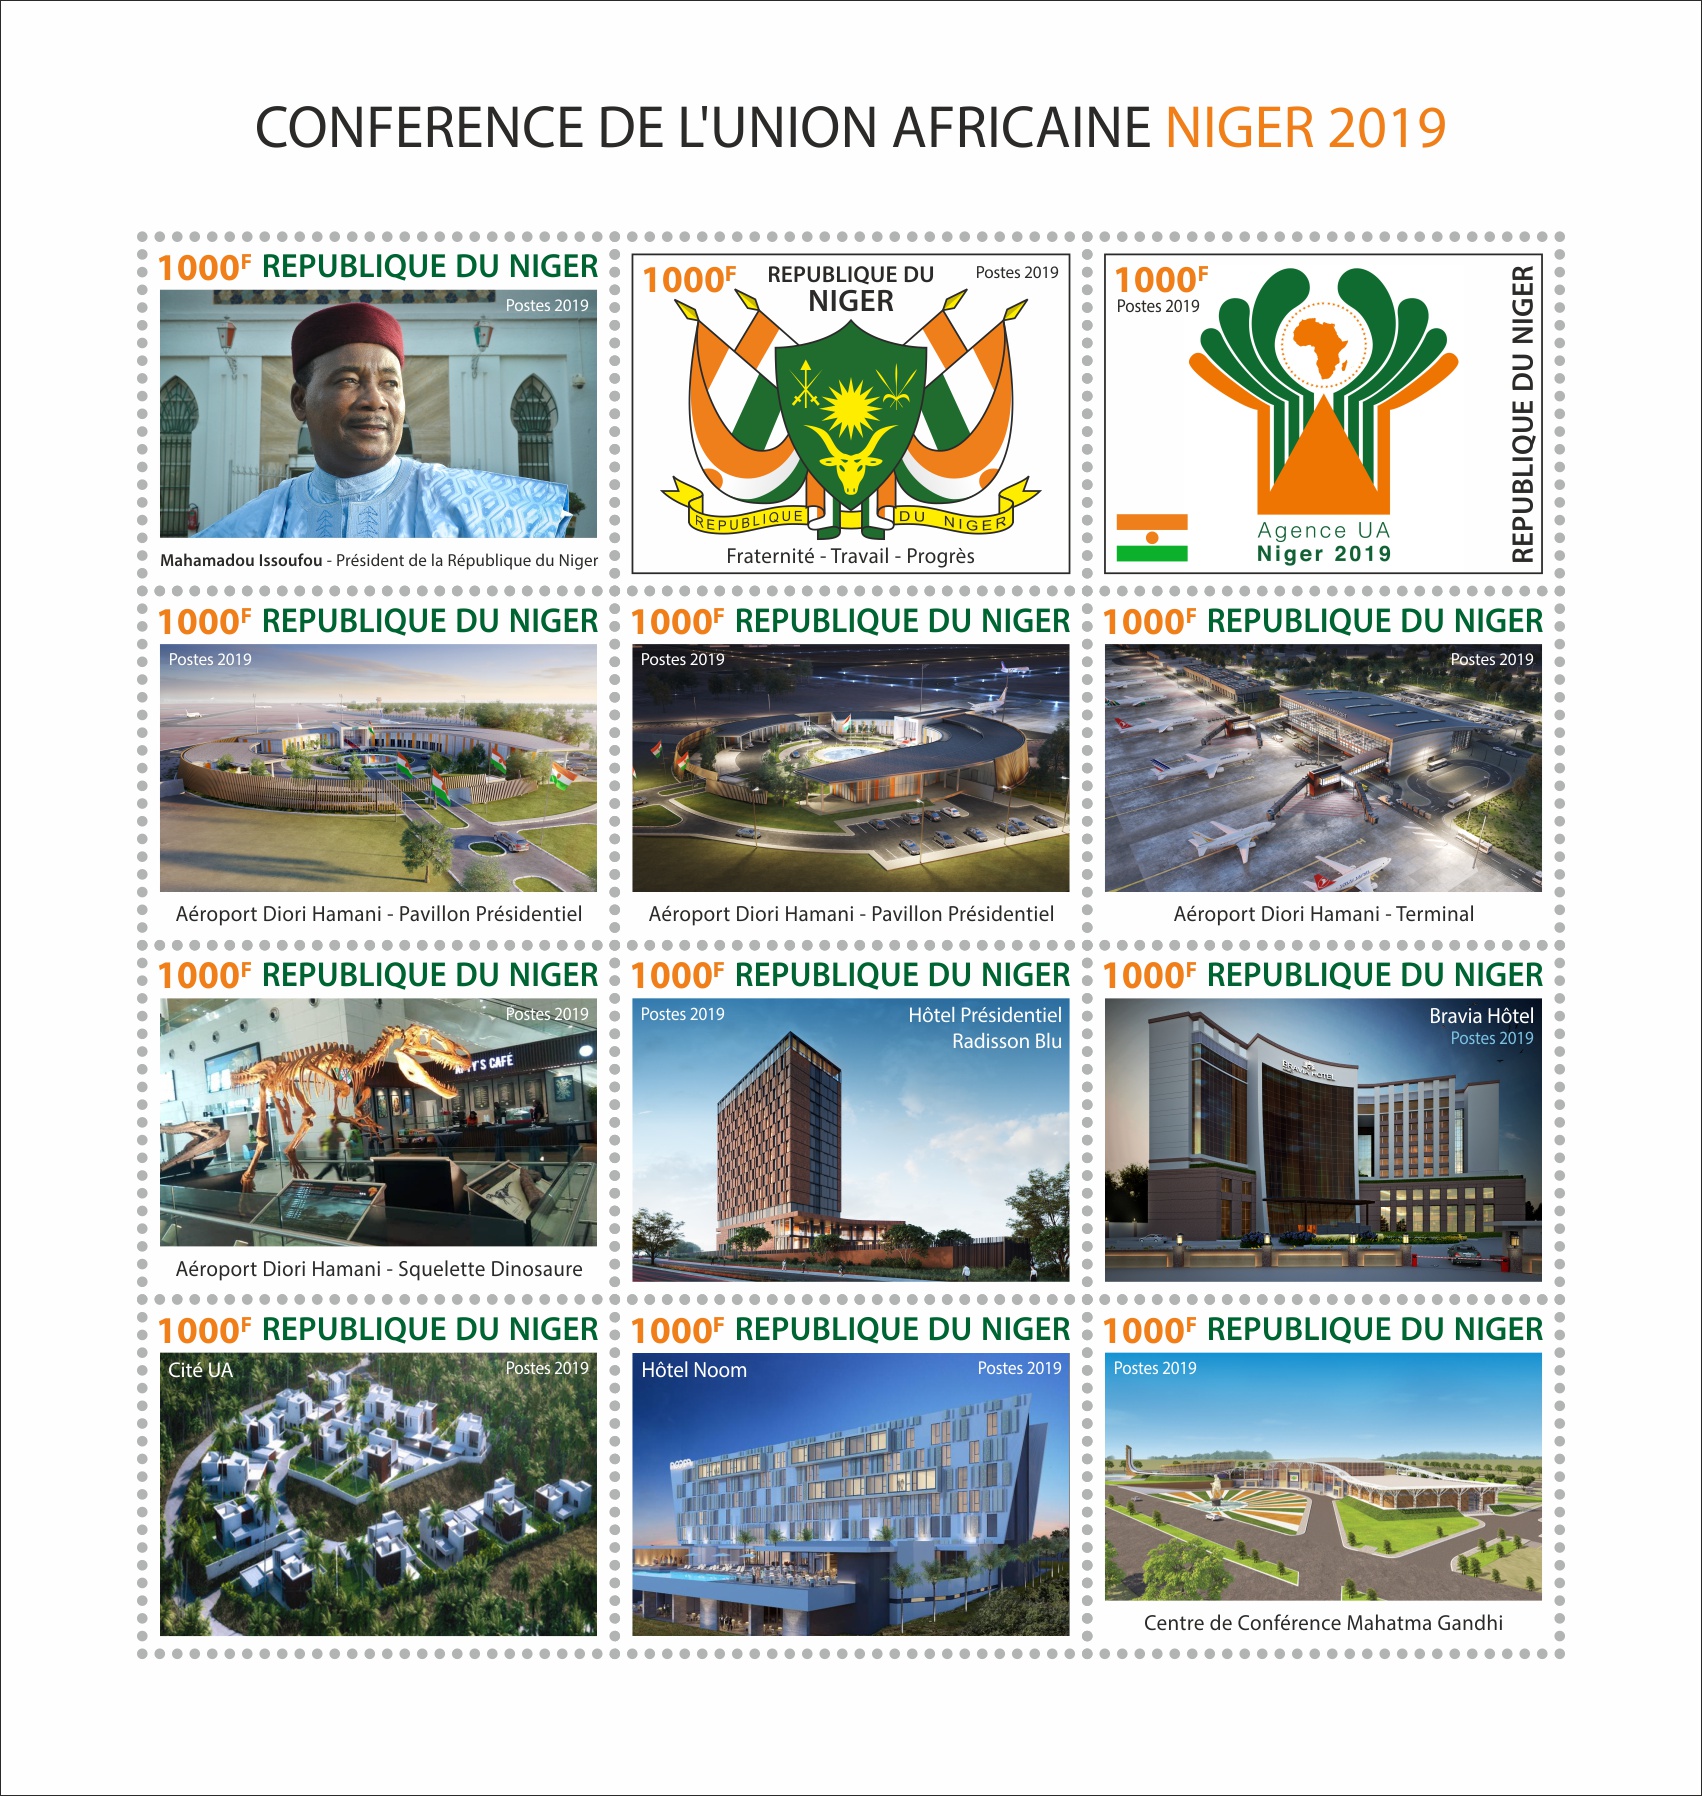 African Union Conference - Issue of Niger postage stamps